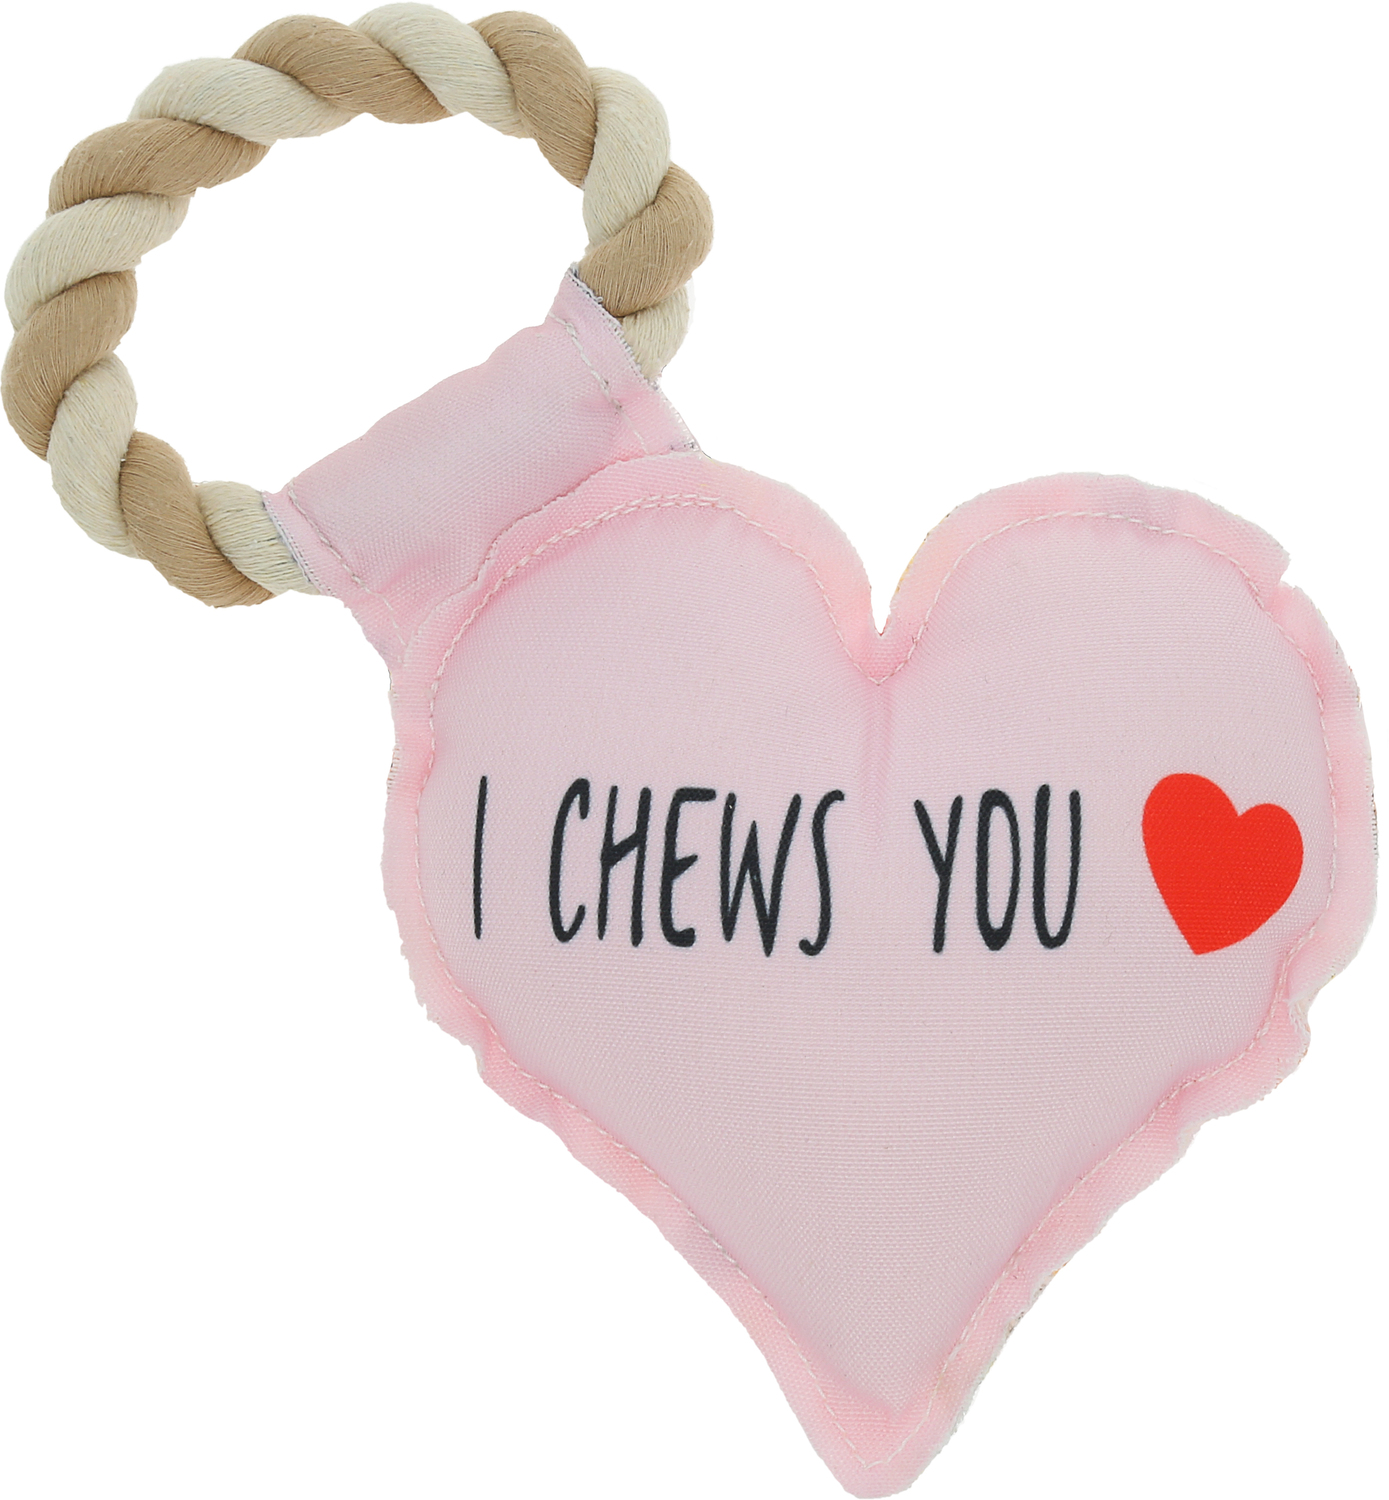 I Chews You by Pawsome Pals - I Chews You - Canvas Dog Toy on a Rope